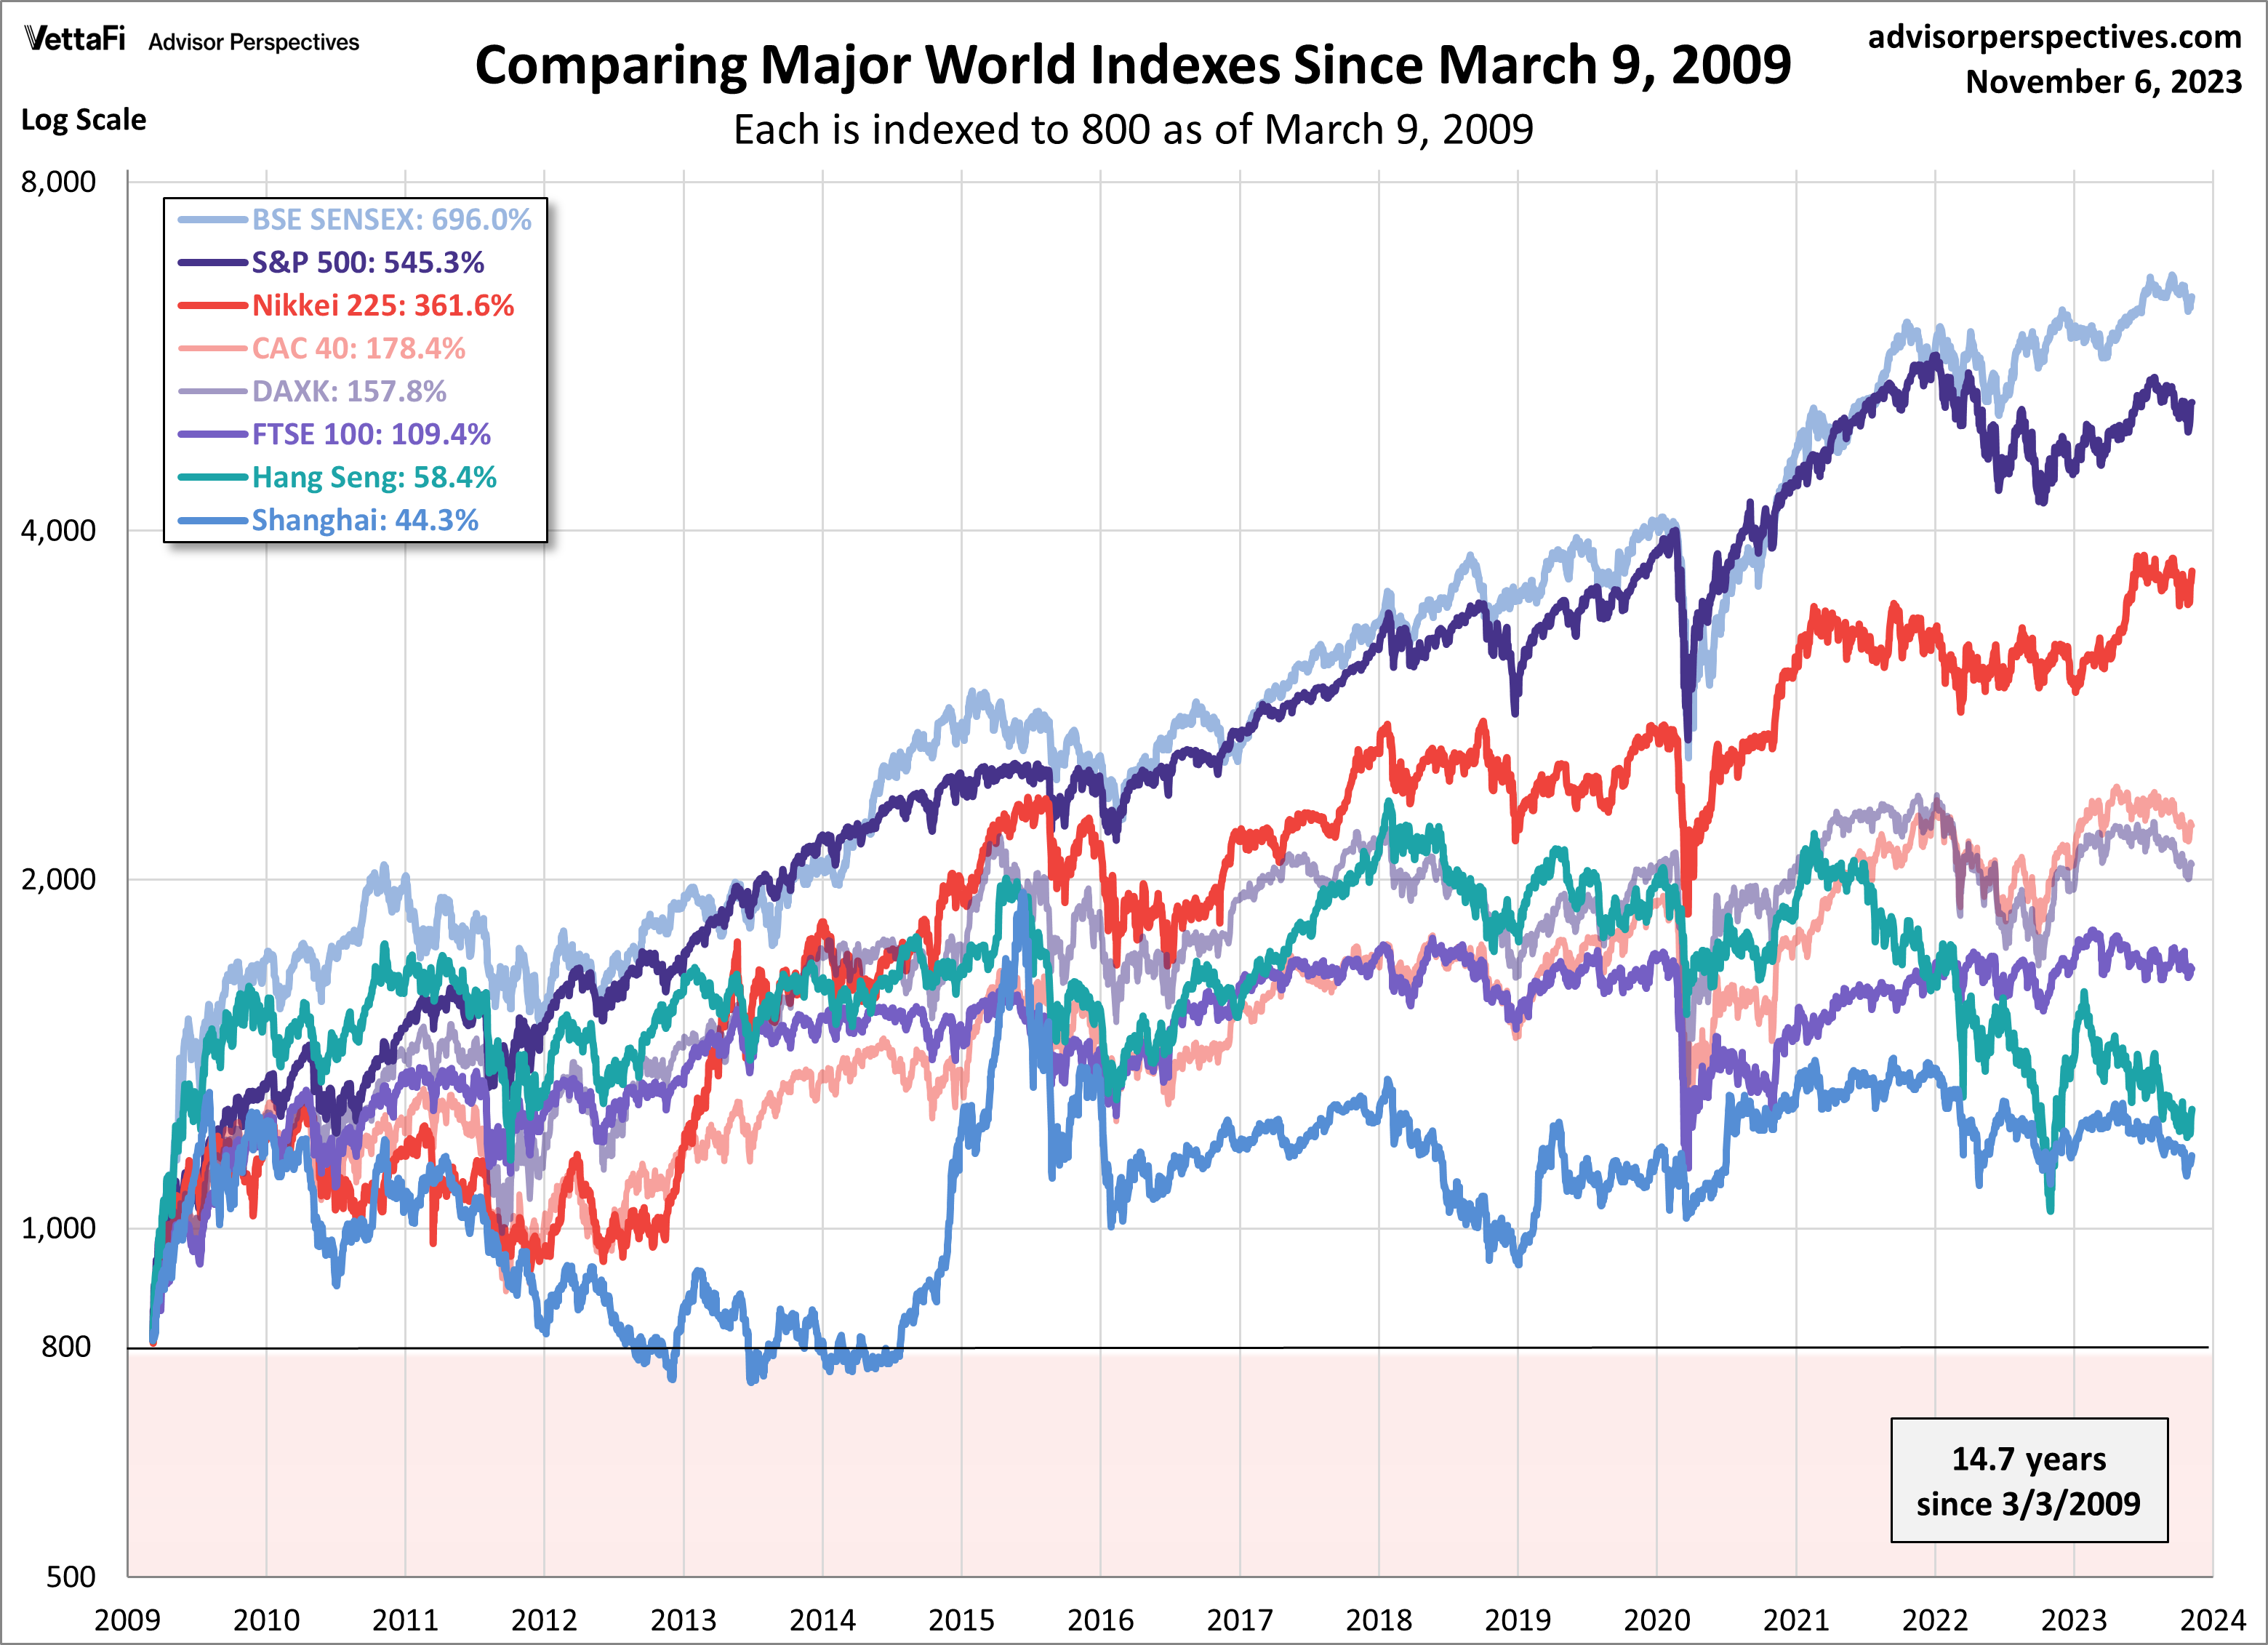 Comparing Major World Indexes since 3/9/2009